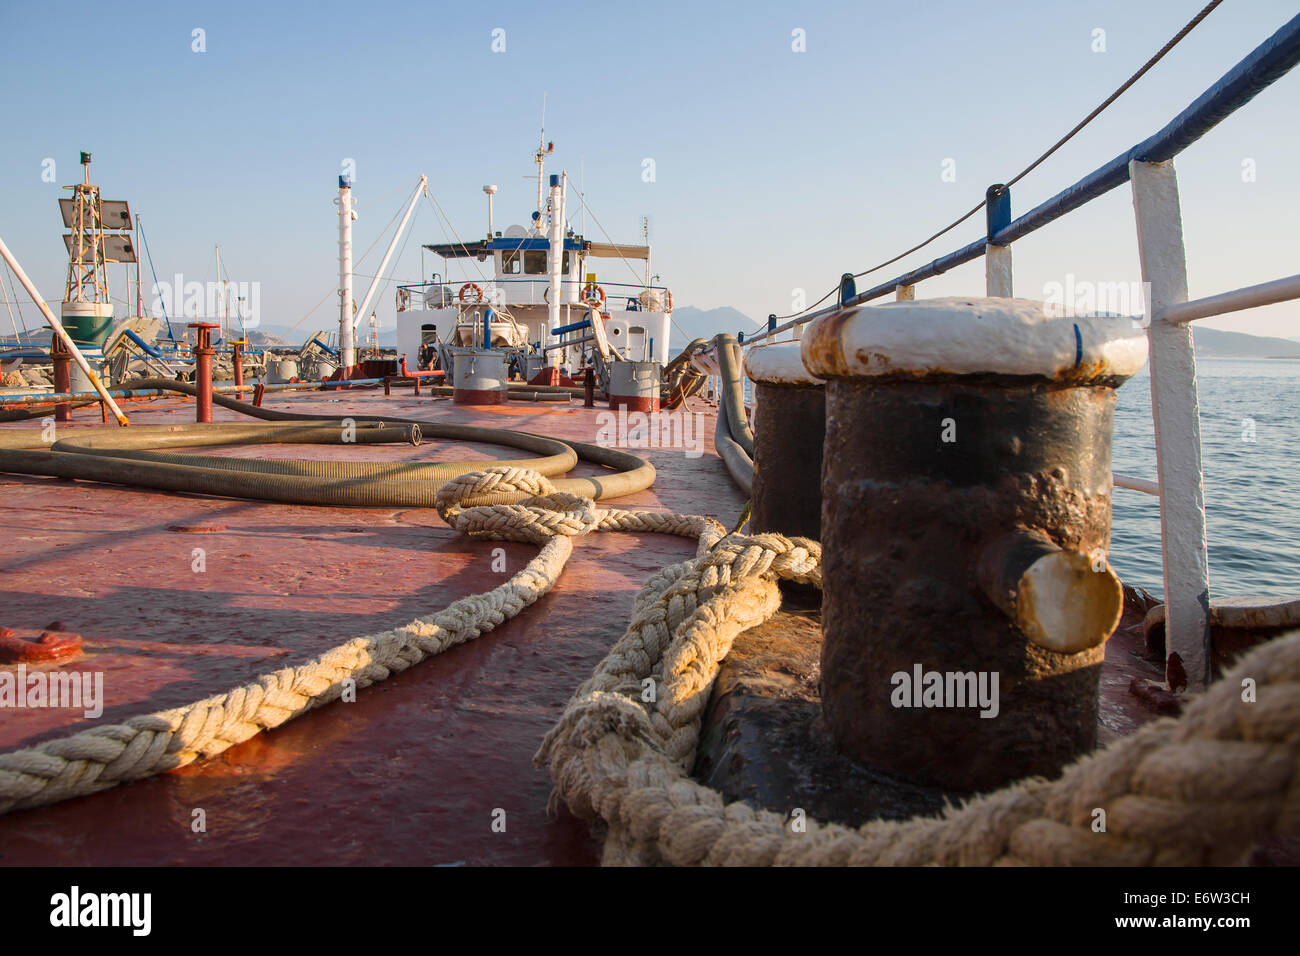 Deck of an old water ship - technical details. Rusty, antique and ancient technology. Stock Photo